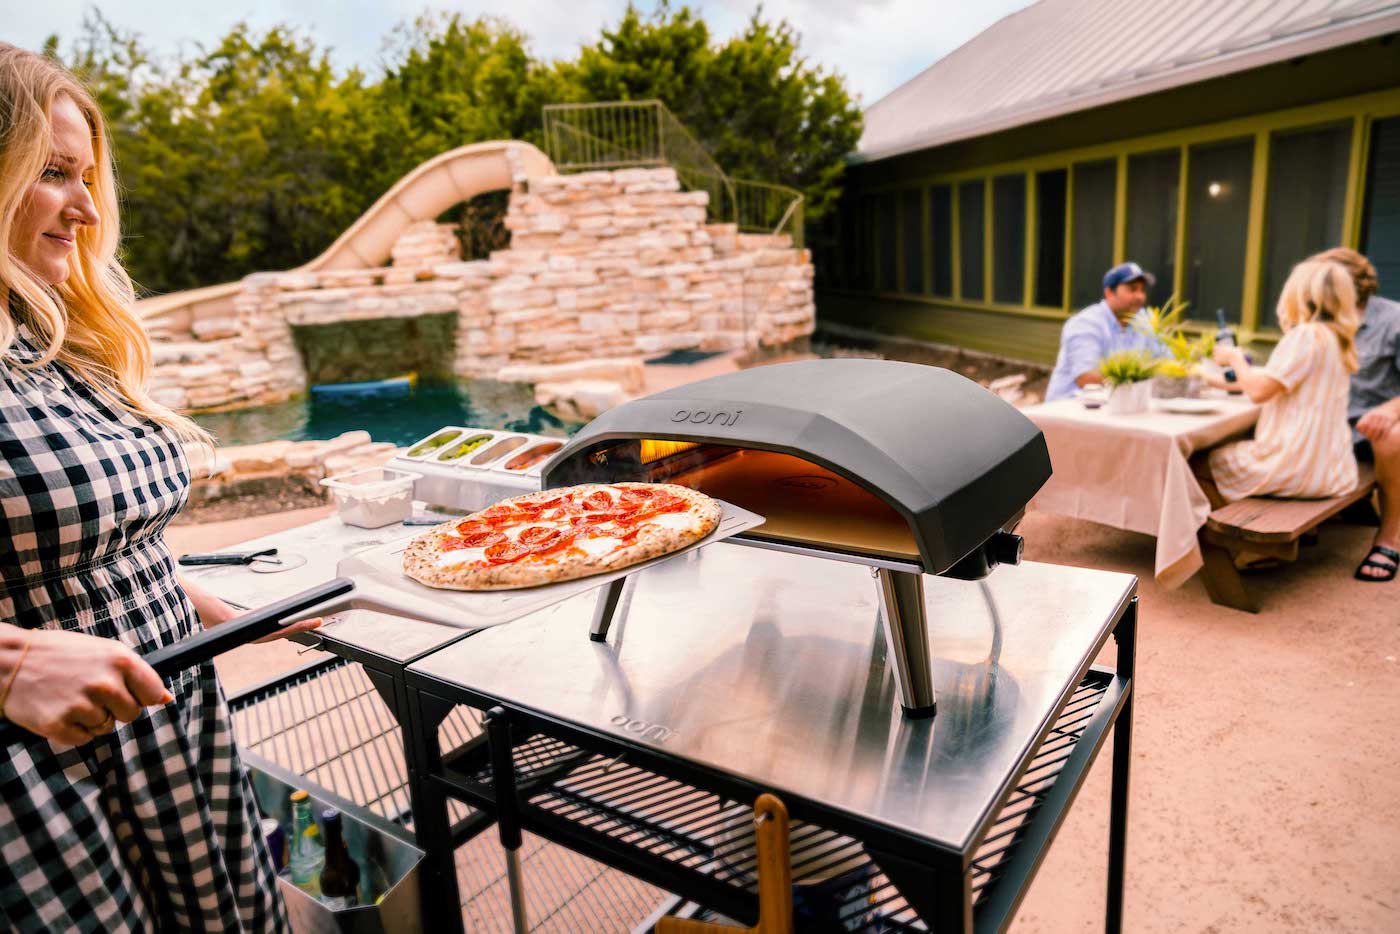 Ooni Portable Pizza Oven, 12 and 16, Powder-Coated Steel & Ceramic on  Food52